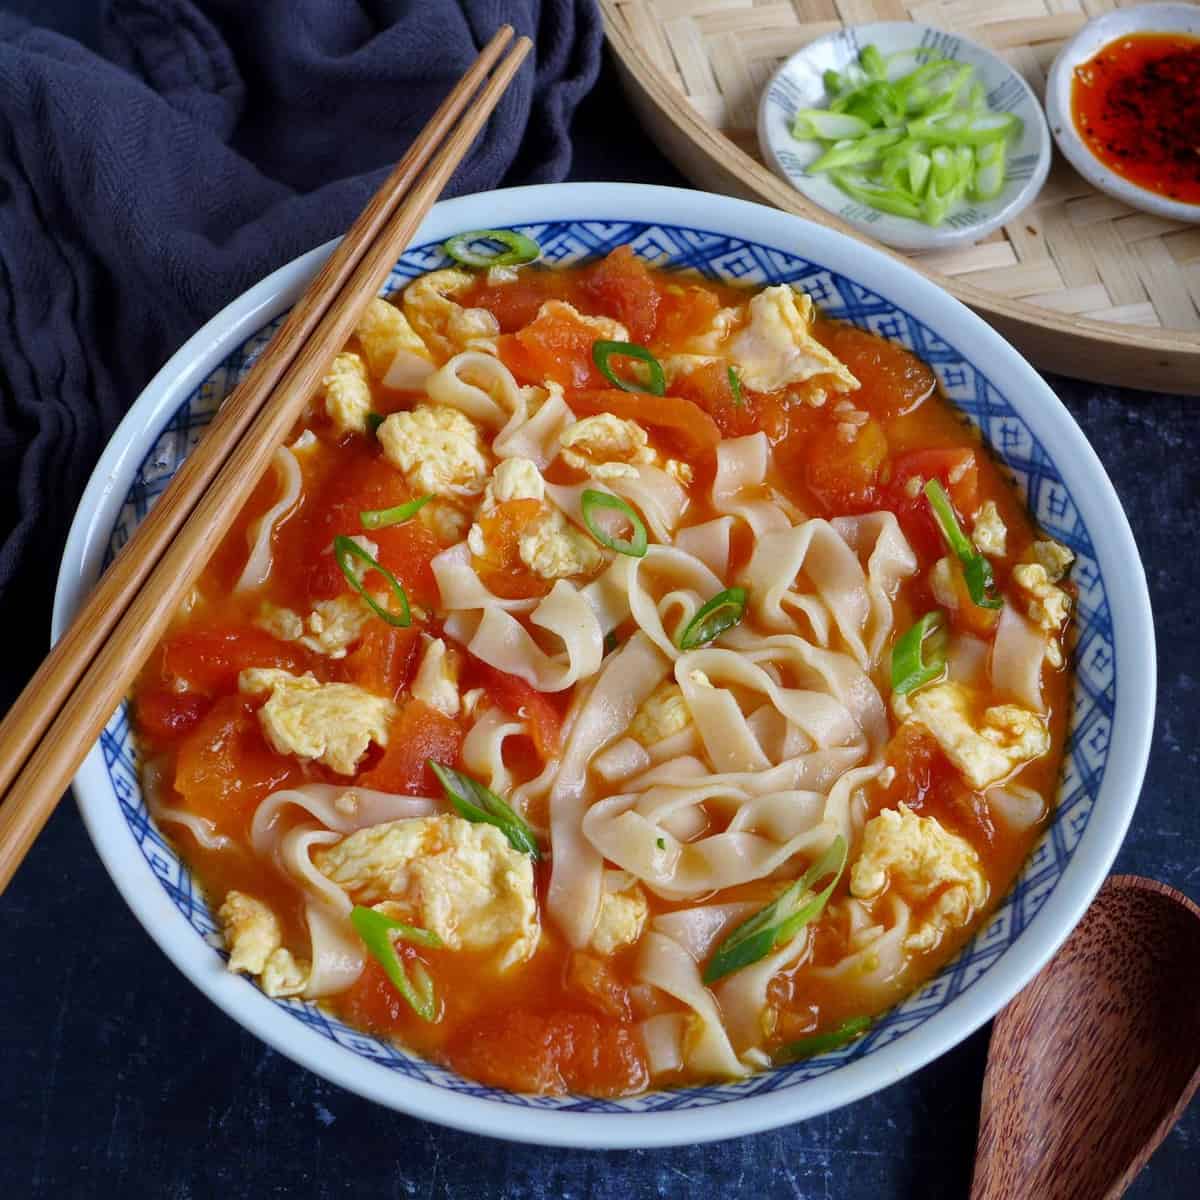 Tomato and egg soup in a bowl